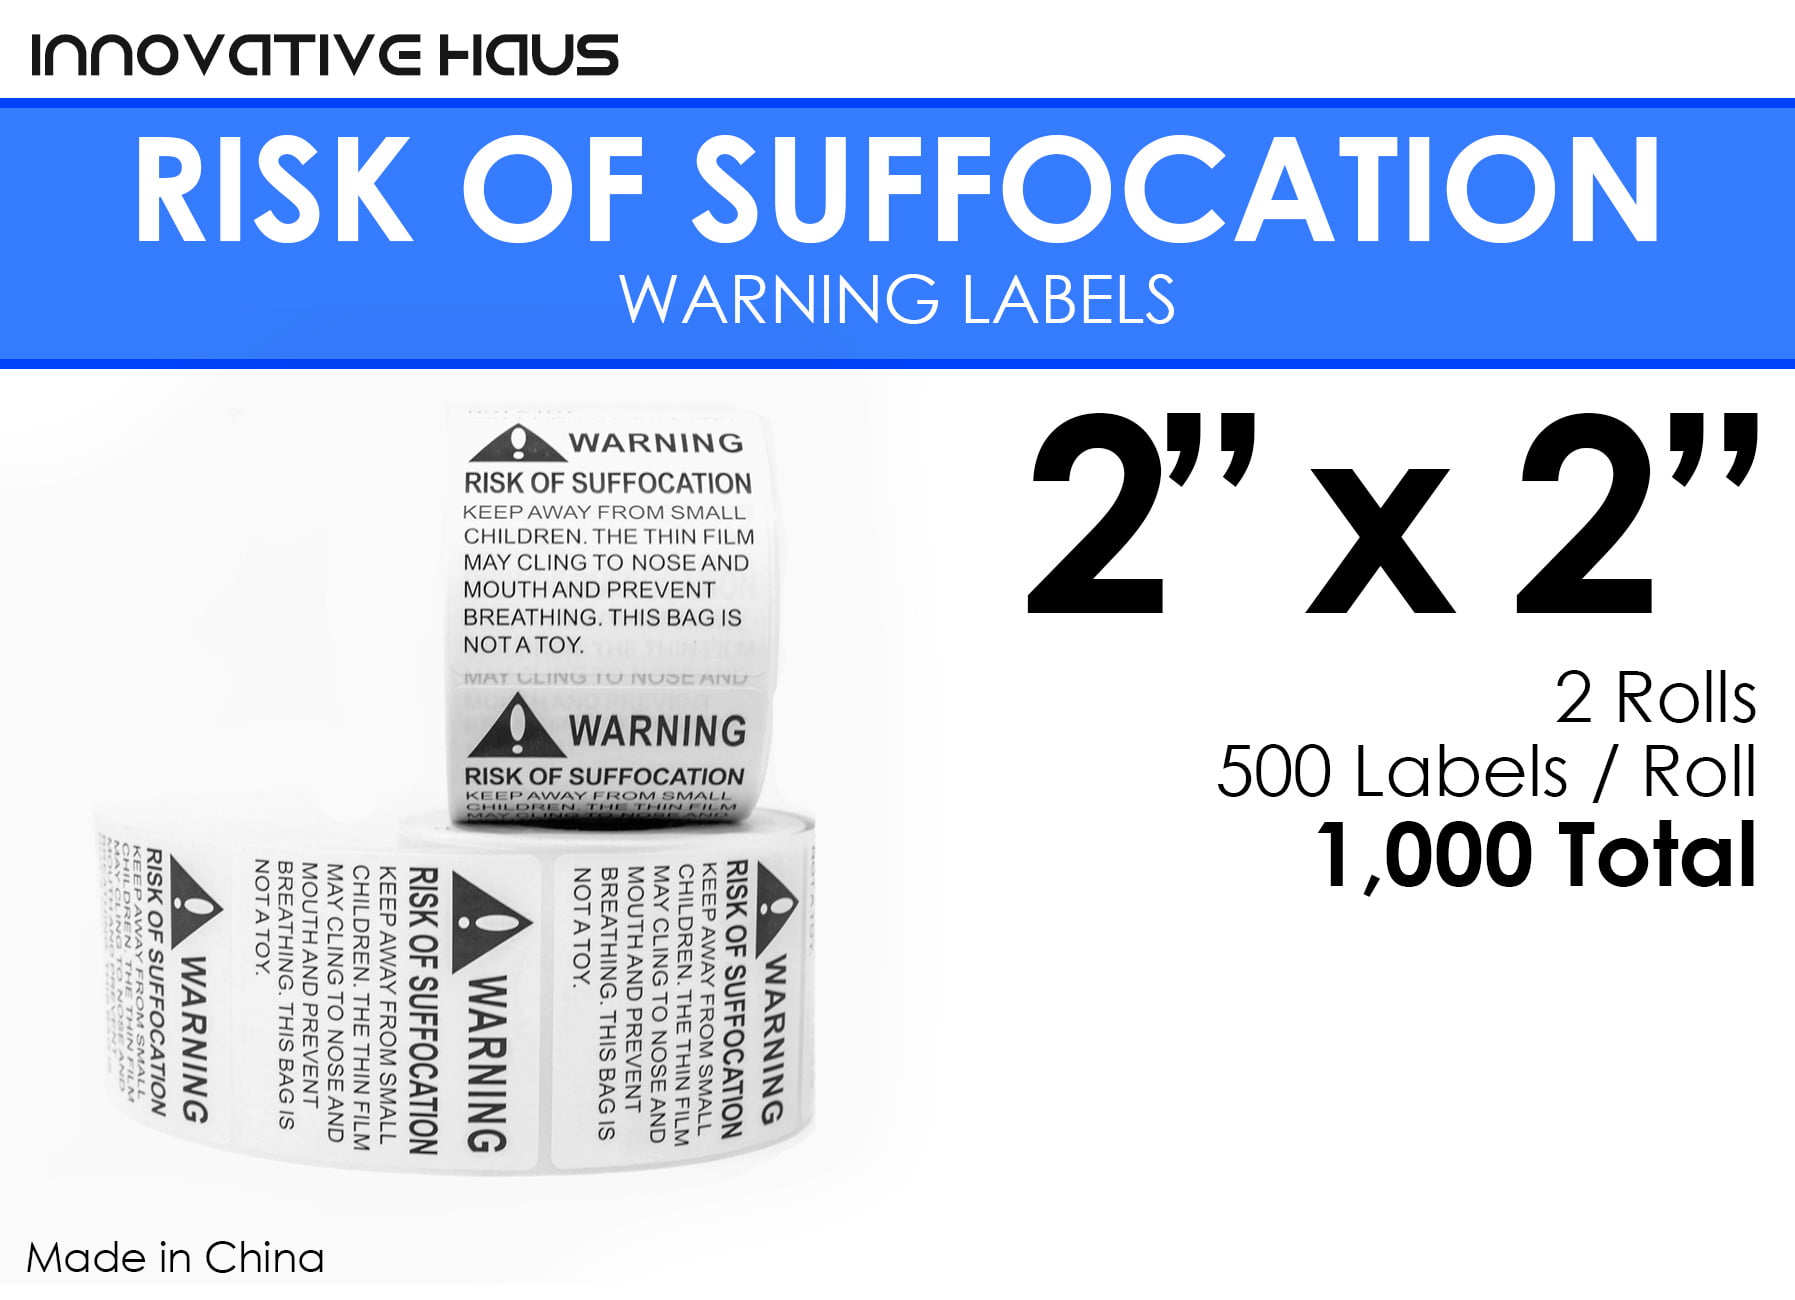 Innovative Haus 5 Rolls x 500 Labels 2,500 Total Risk of Suffocation Warning 